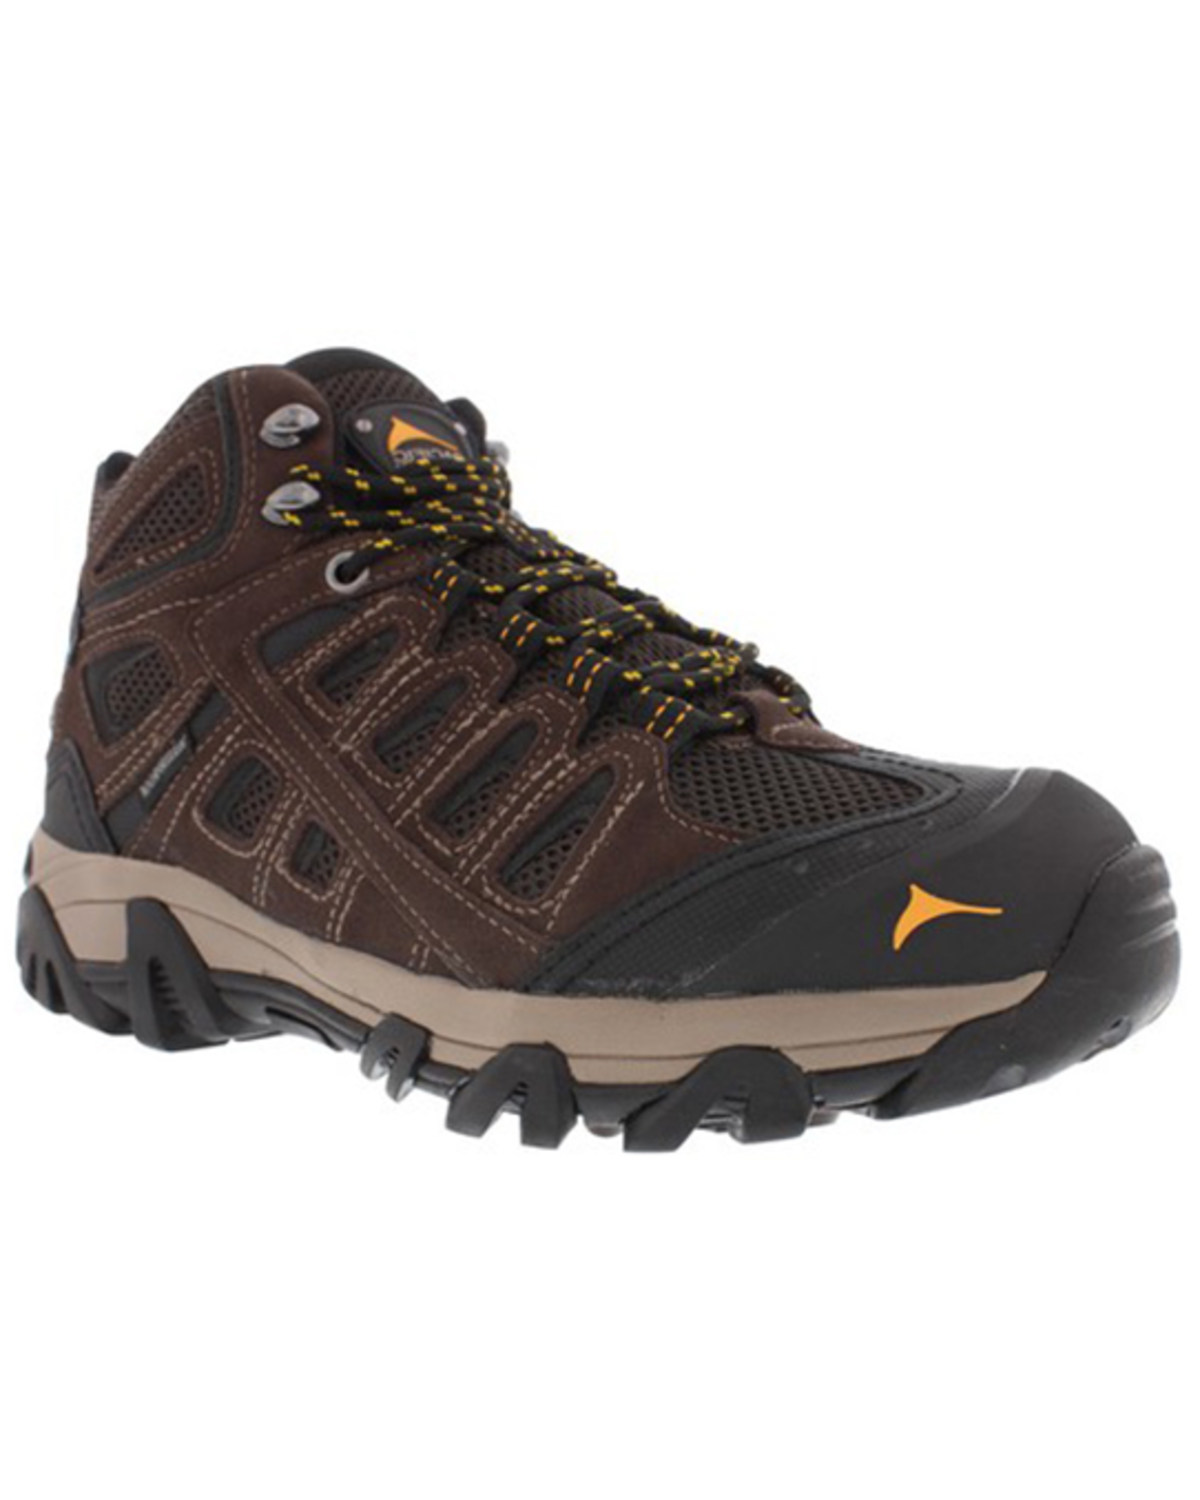 Pacific Mountain Men's Blackburn Mid Lace-Up Waterproof Hiking Boots